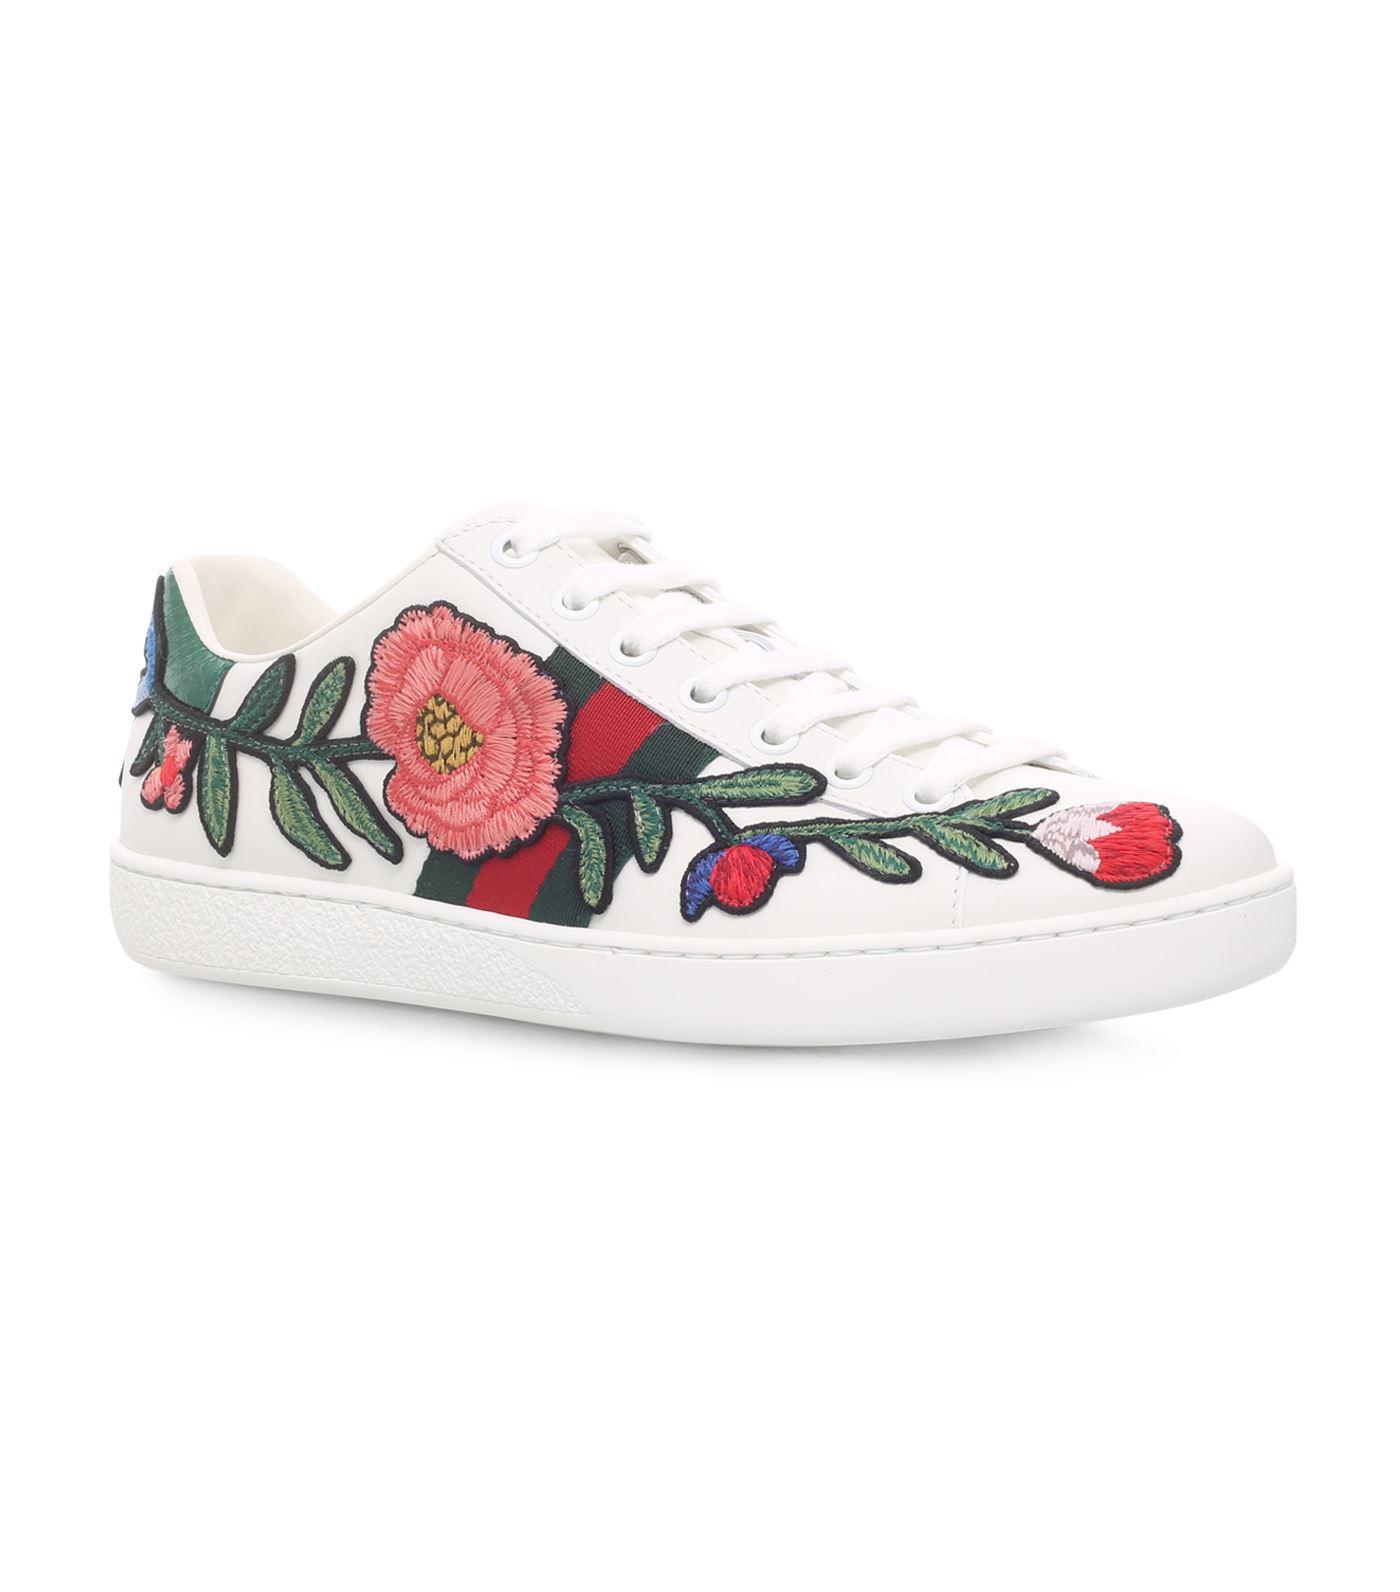 Gucci Leather New Ace Flower Sneakers in White - Lyst